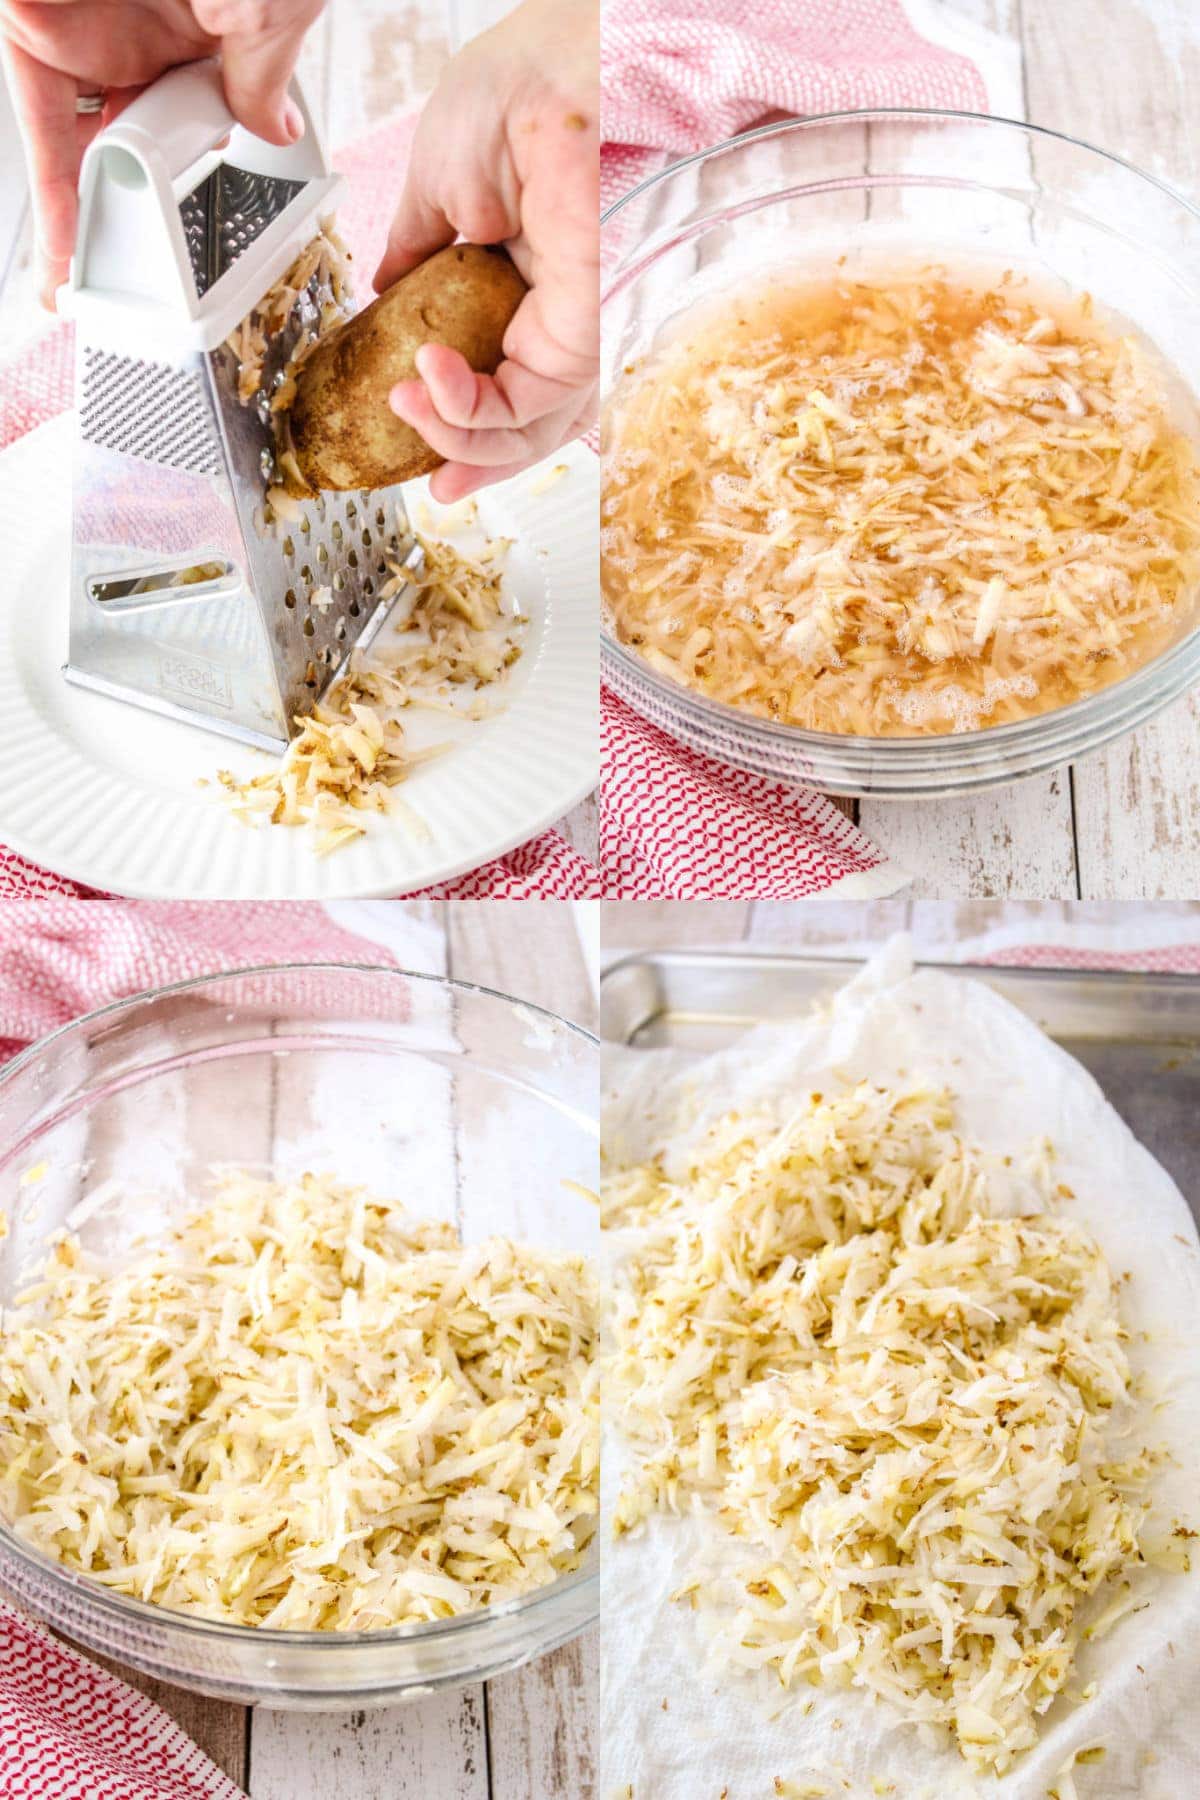 potatoes being shredded on a box grater, shredded potatoes in a bowl of cloudy water, shredded potatoes after being rinsed, shredded potatoes on paper towels after being rung out to remove excess water